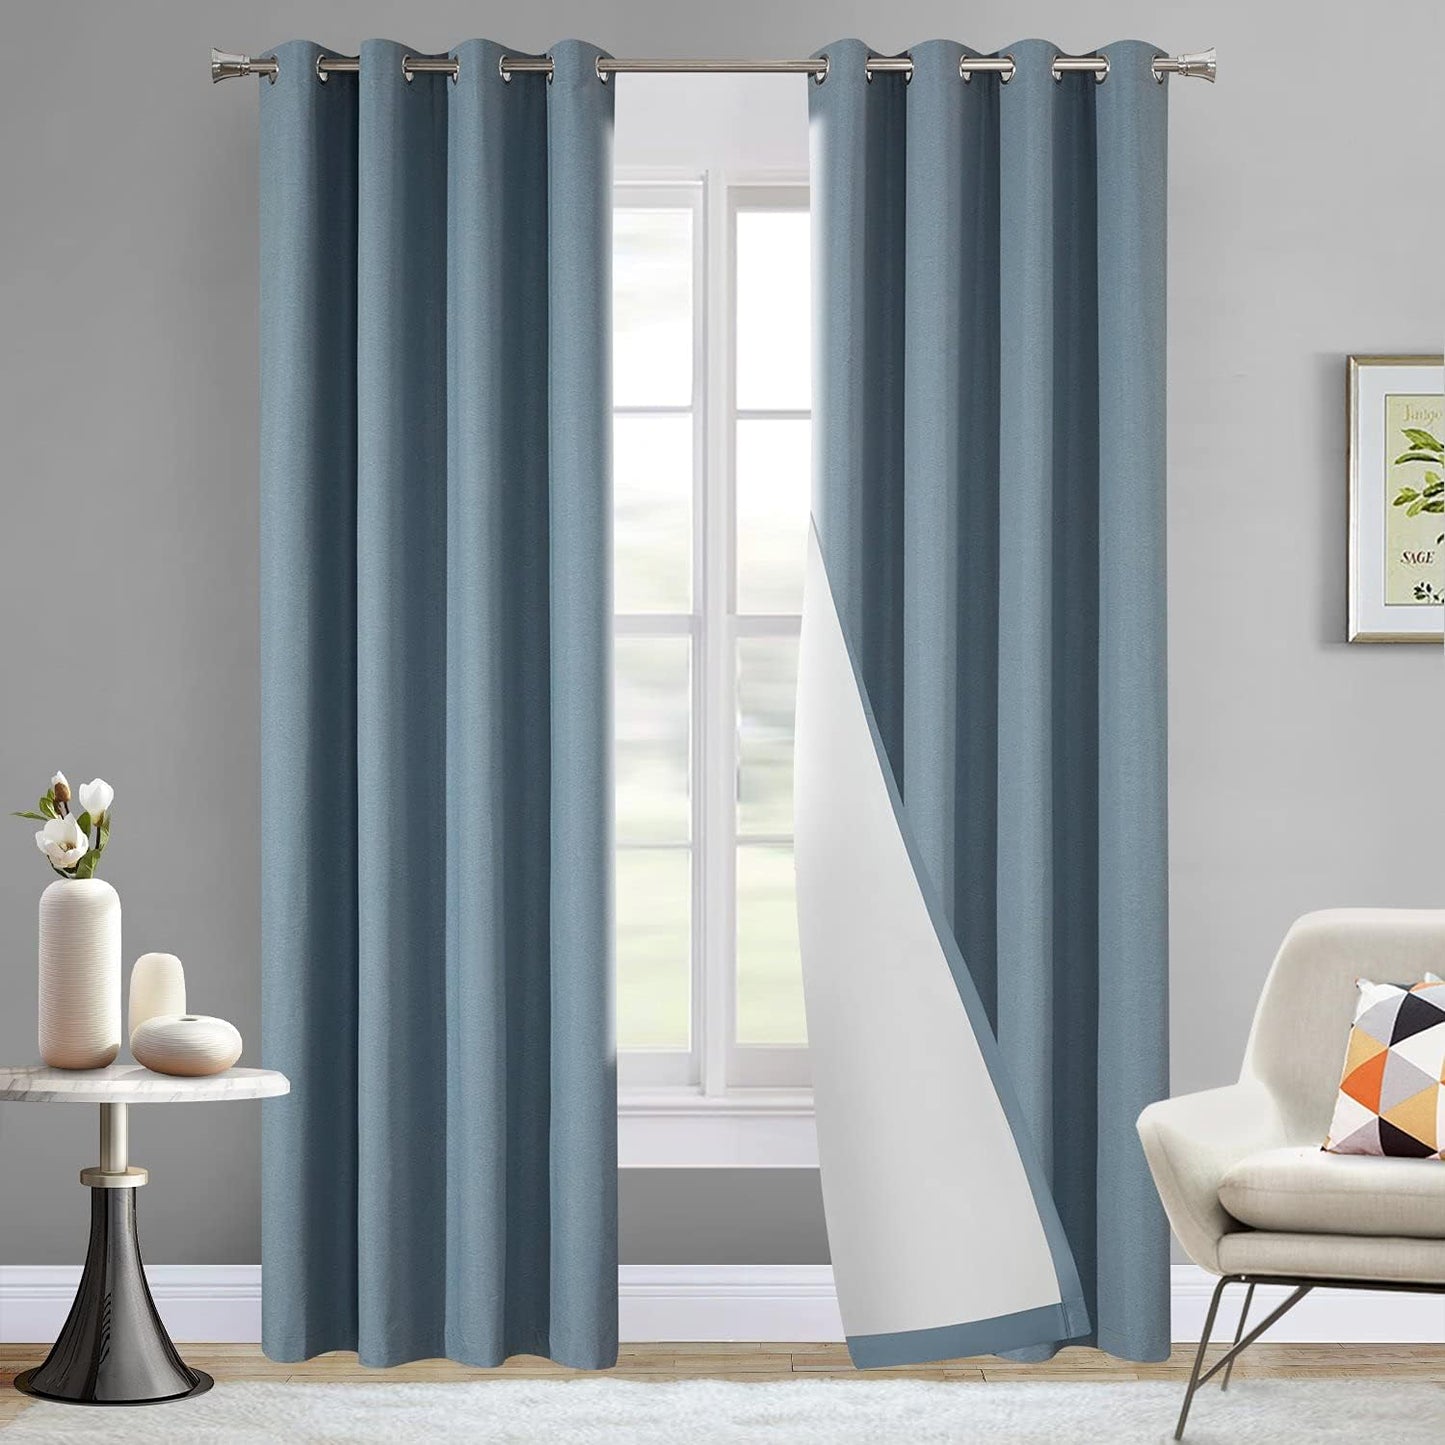 LOYOLADY Dark Grey Blackout Curtains 102 Inches Long 2 Panels Set Thermal Insulated Curtains for Living Room Grommet Noise Reduce Curtains for Bedroom 52" W X 102" L  LoyoLady Home Textiles Teal 100 Blackout Curtains, Grommet 2 X ( 72" W X 84" L ) 